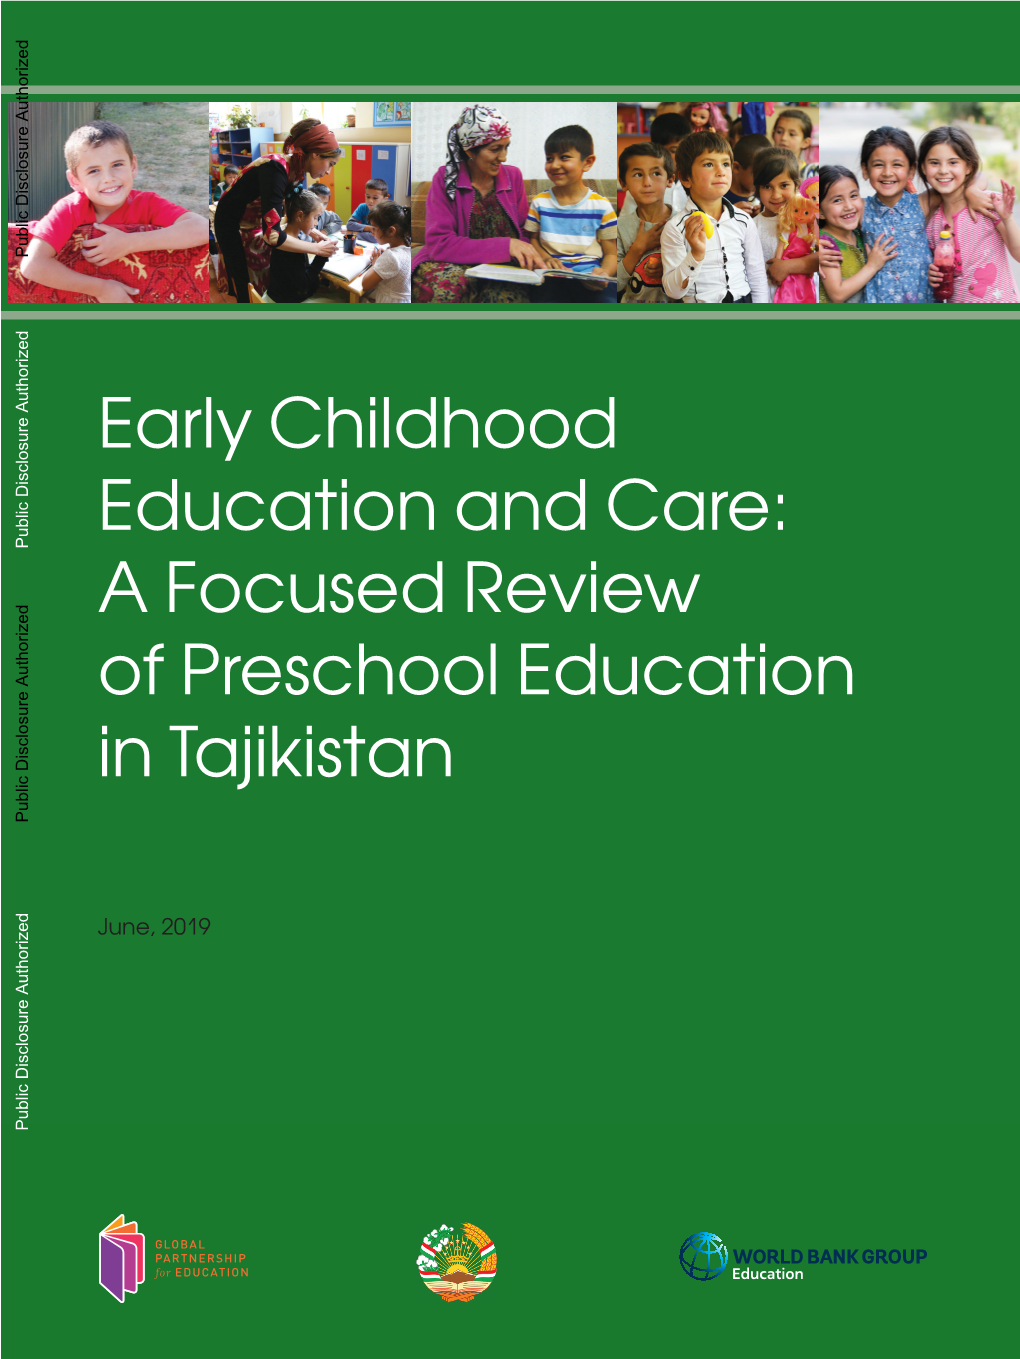 Early Childhood Education and Care: a Focused Review of Preschool Education in Tajikistan